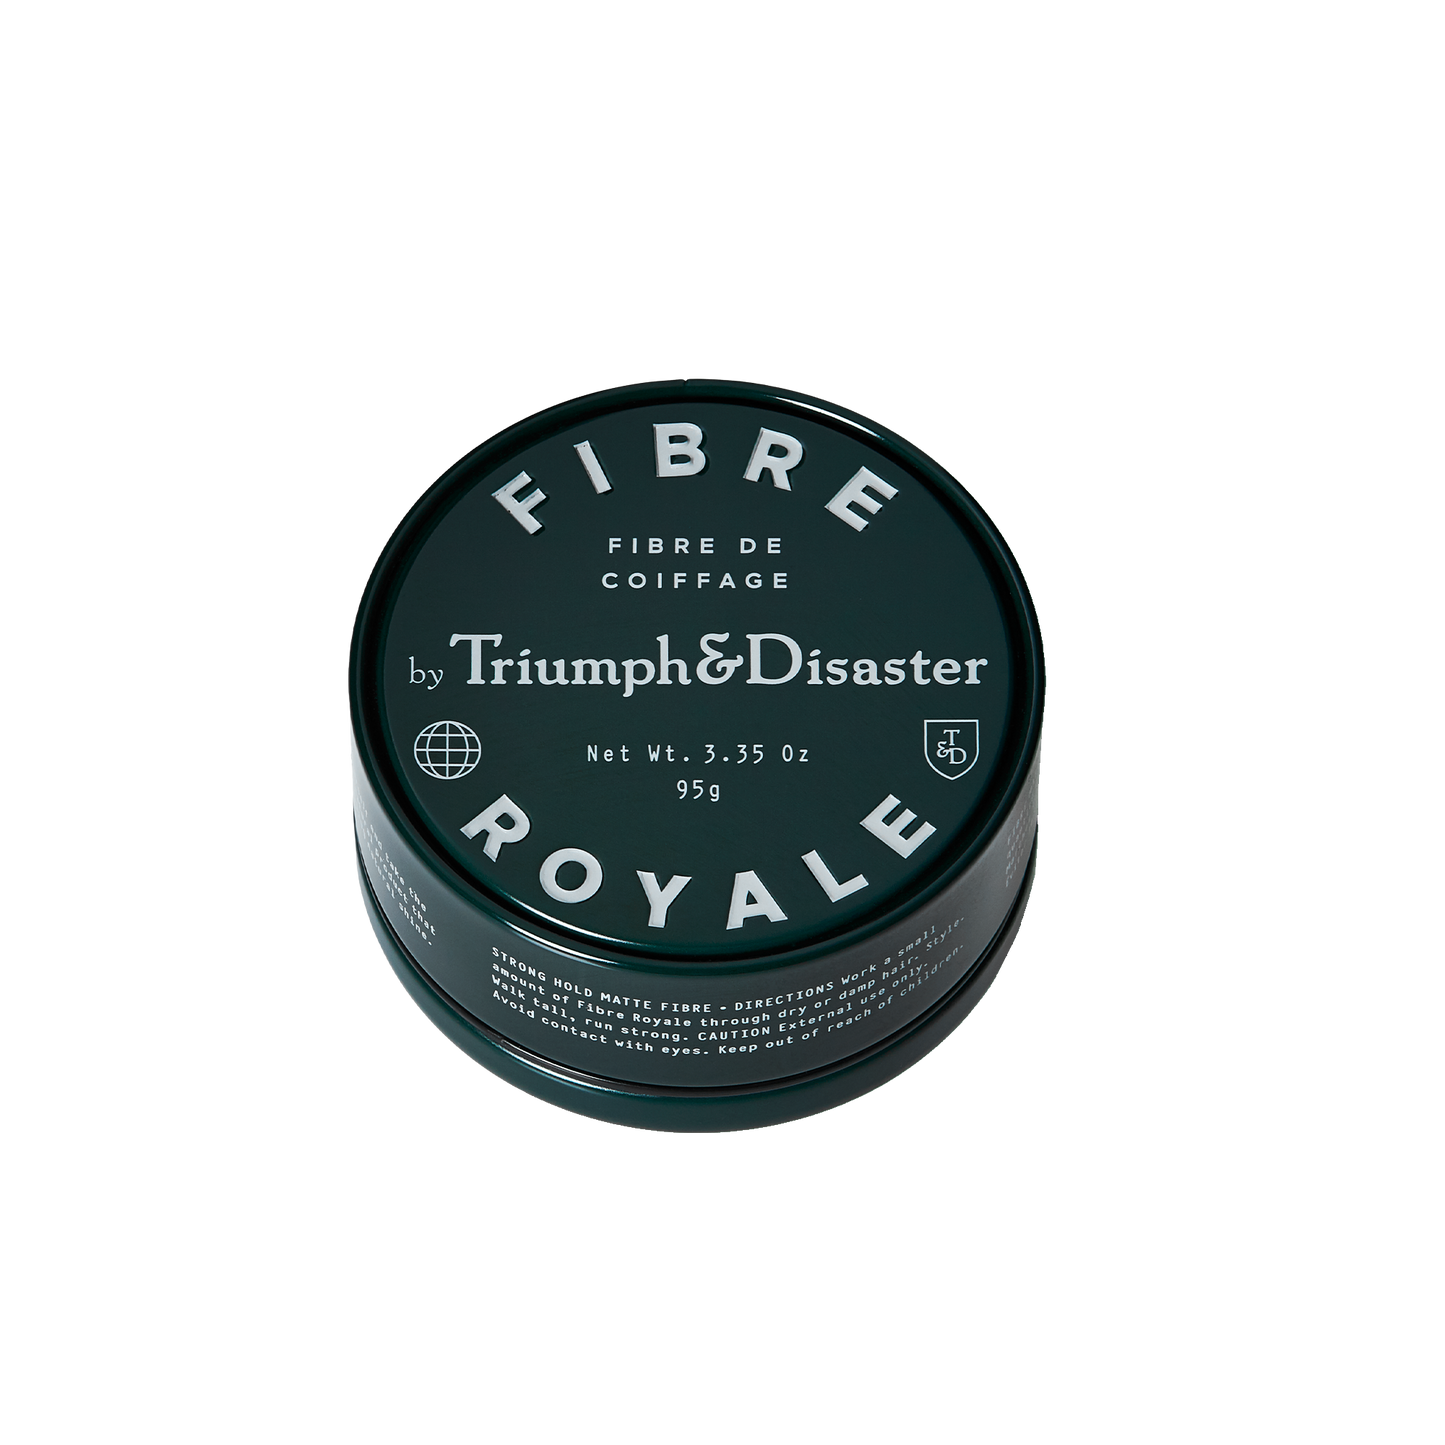 Triumph and Disaster Fibre Royale: Be true to yourself and take the fight to the world, this is Fibre Royale’s DNA. A strong, natural product that provides strength and hold without adding volume or dulling natural shine. Utilising a bespoke blend of Beeswax, Argan oil and Kawakawa to mould hair and treat the scalp, Fibre Royale is a strong hold, low volume product that delivers a natural look & style. Perfect for medium to long hairstyles, ideal for men’s cuts, best for thicker hair types.